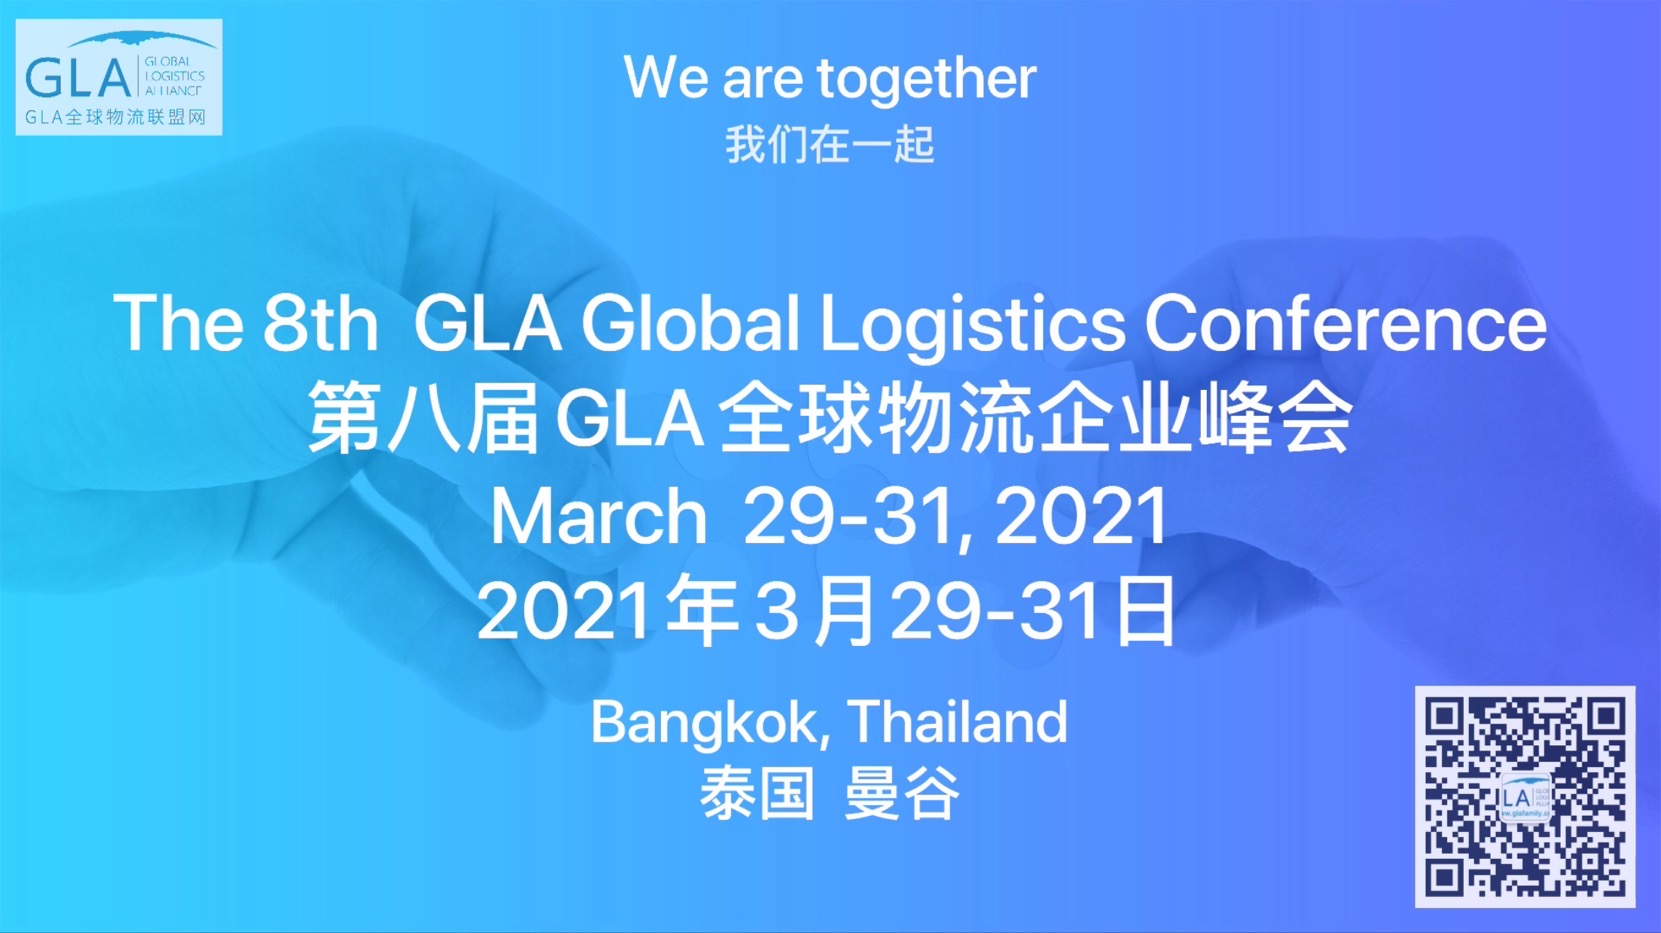 GLA NEWS | Re-schedule Date of GLA Global Logistics Conference has been confirmed